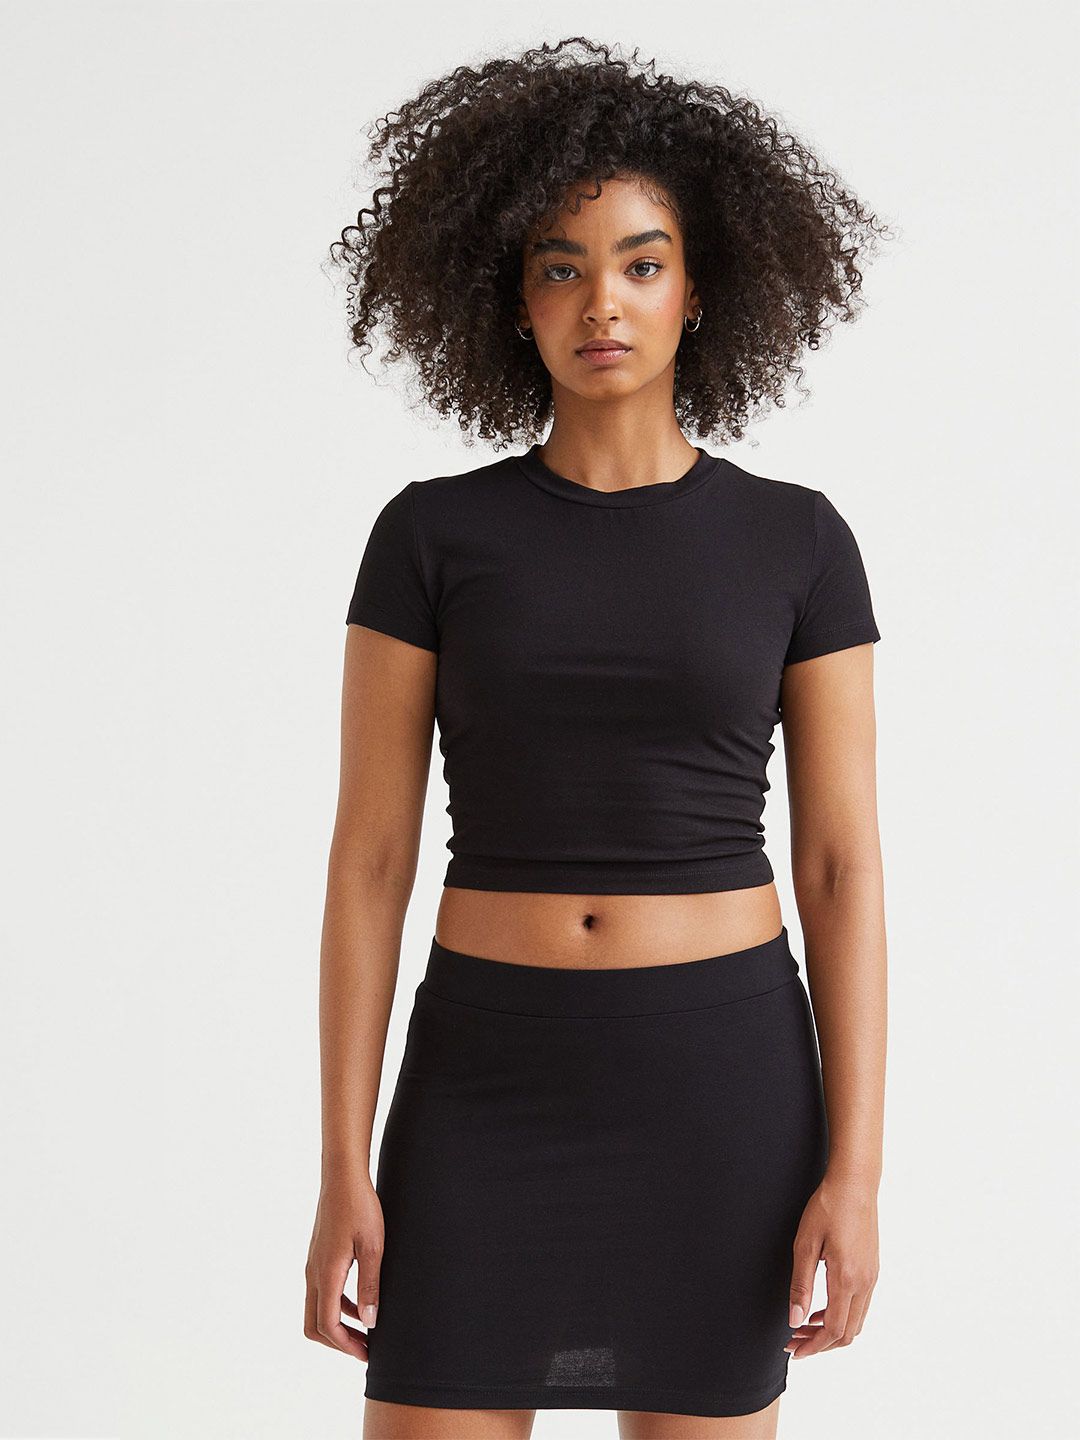 H&M Cropped Top Price in India